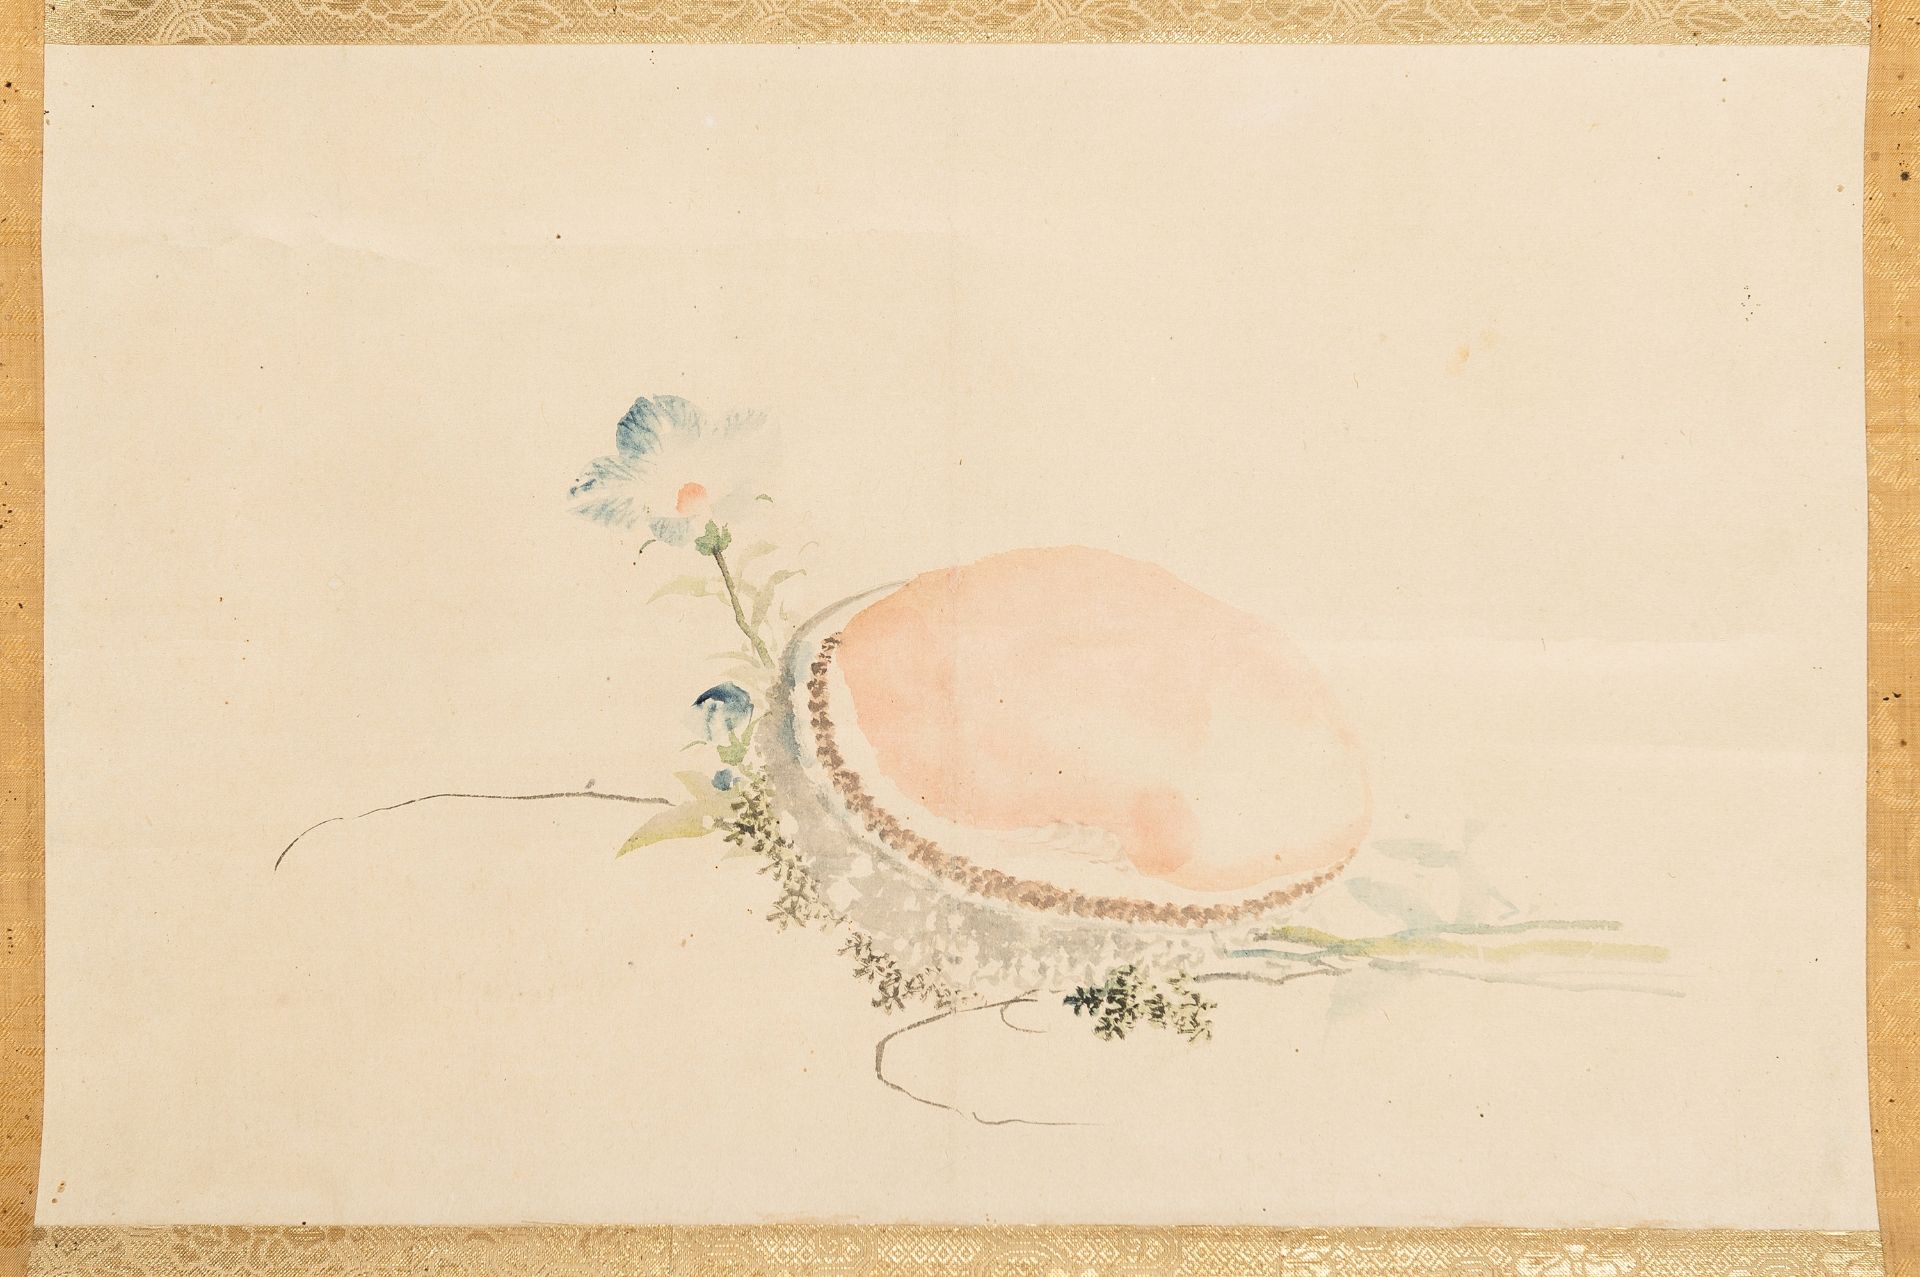 A SCROLL PAINTING OF AN AWABI SHELL, 19th CENTURY